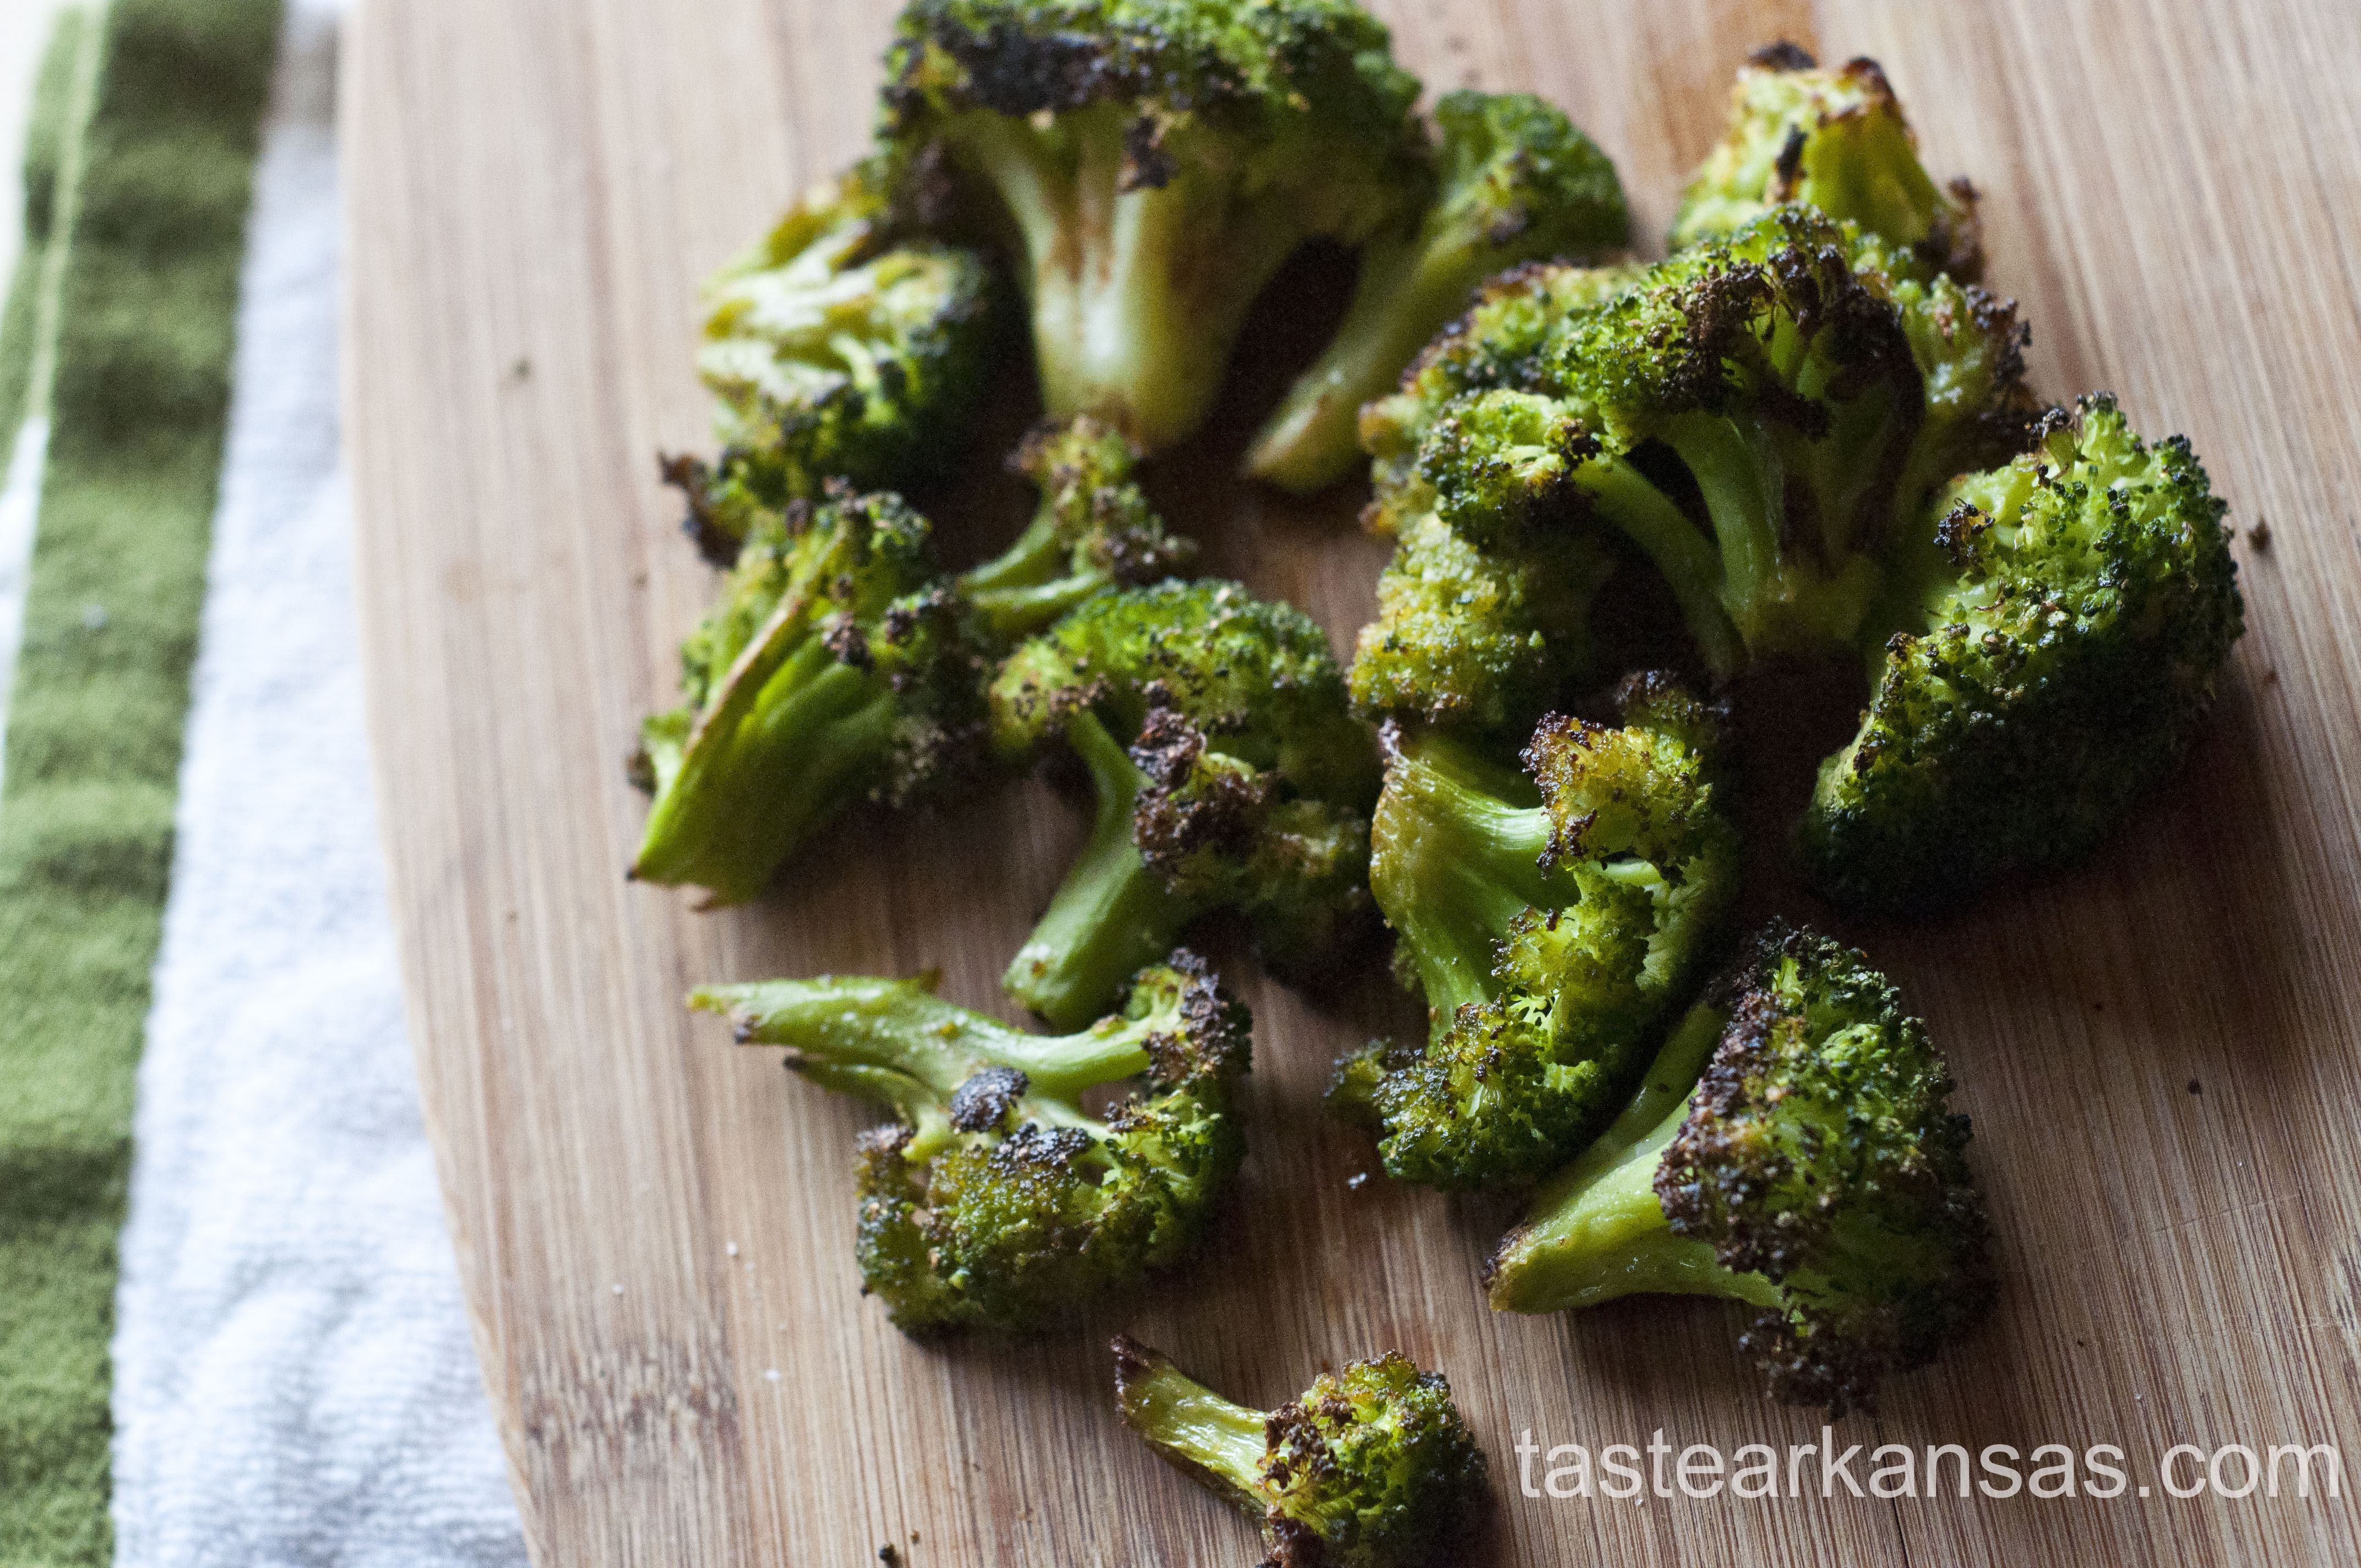 this image is of roasted broccoli florets on a cutting board in natural light